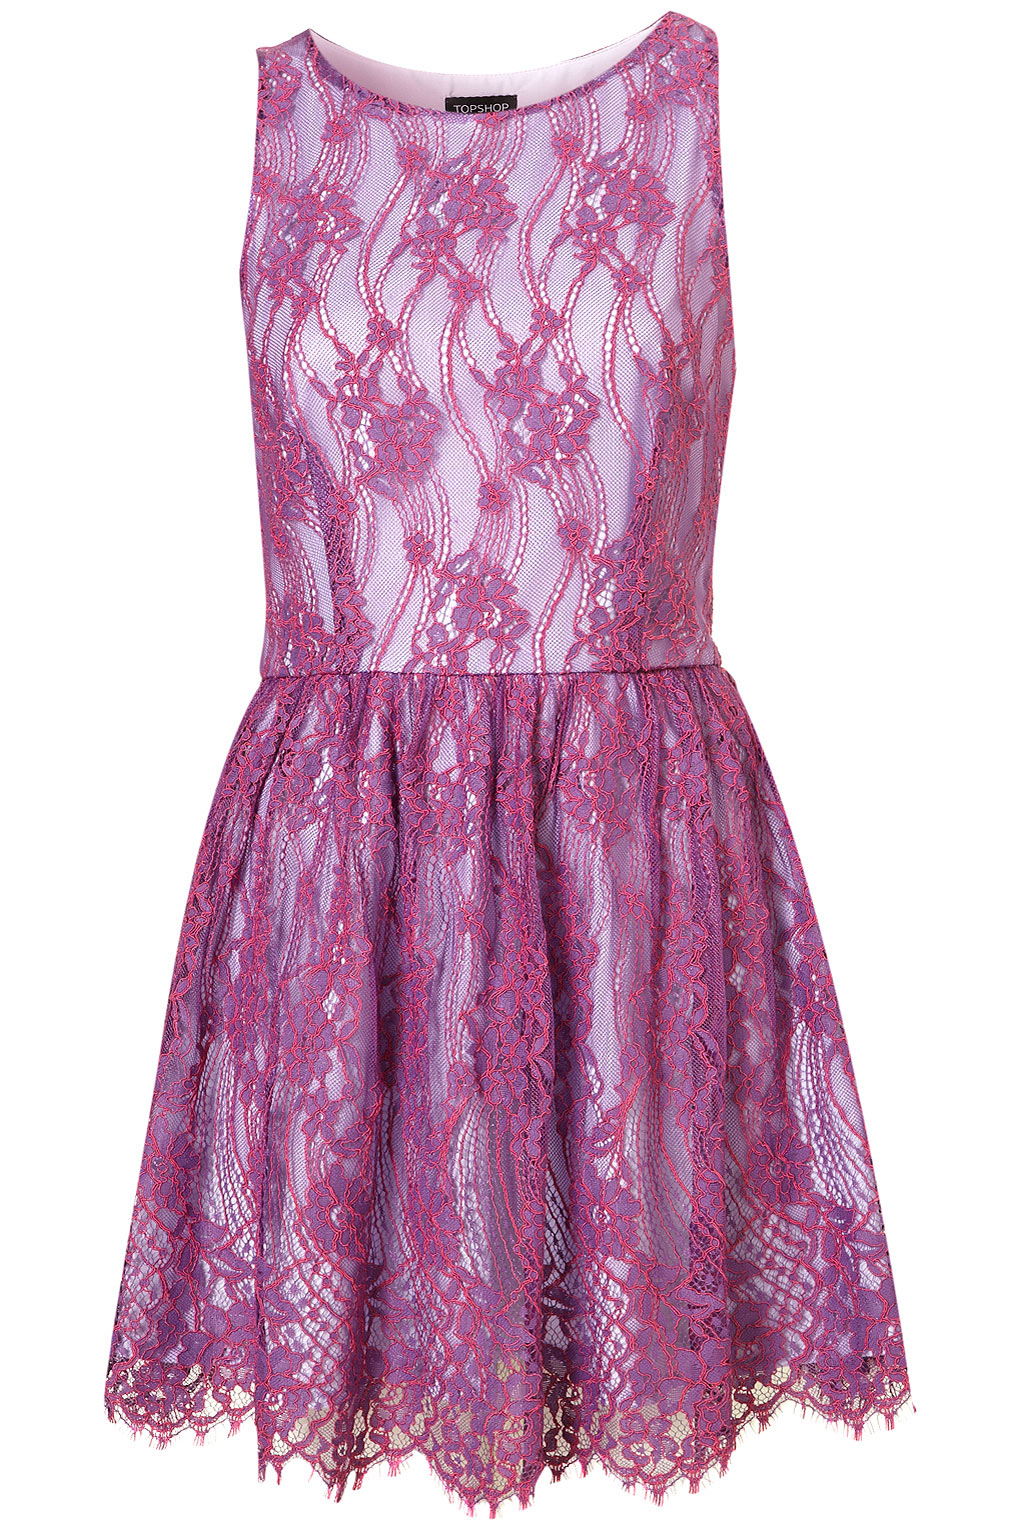 Lyst - TOPSHOP Lace Skater Dress in Purple